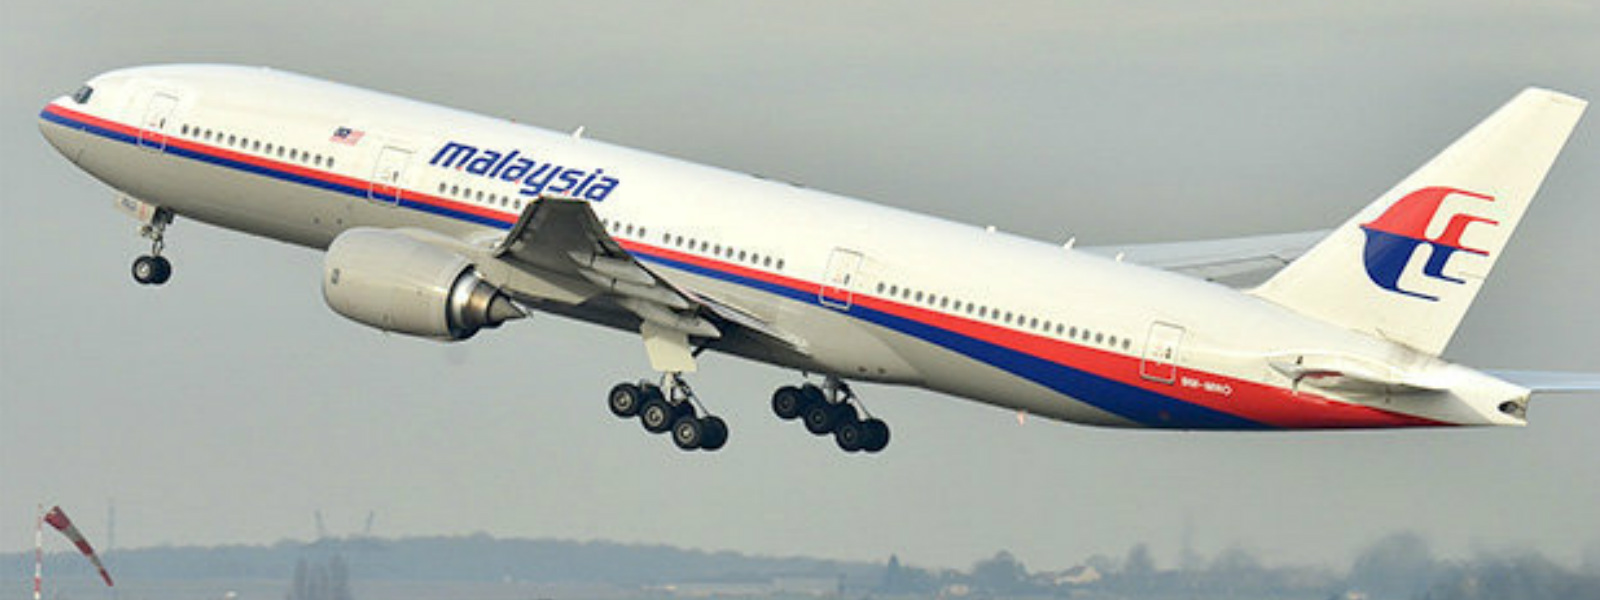 Search for Malaysia Airlines flight MH370 ends